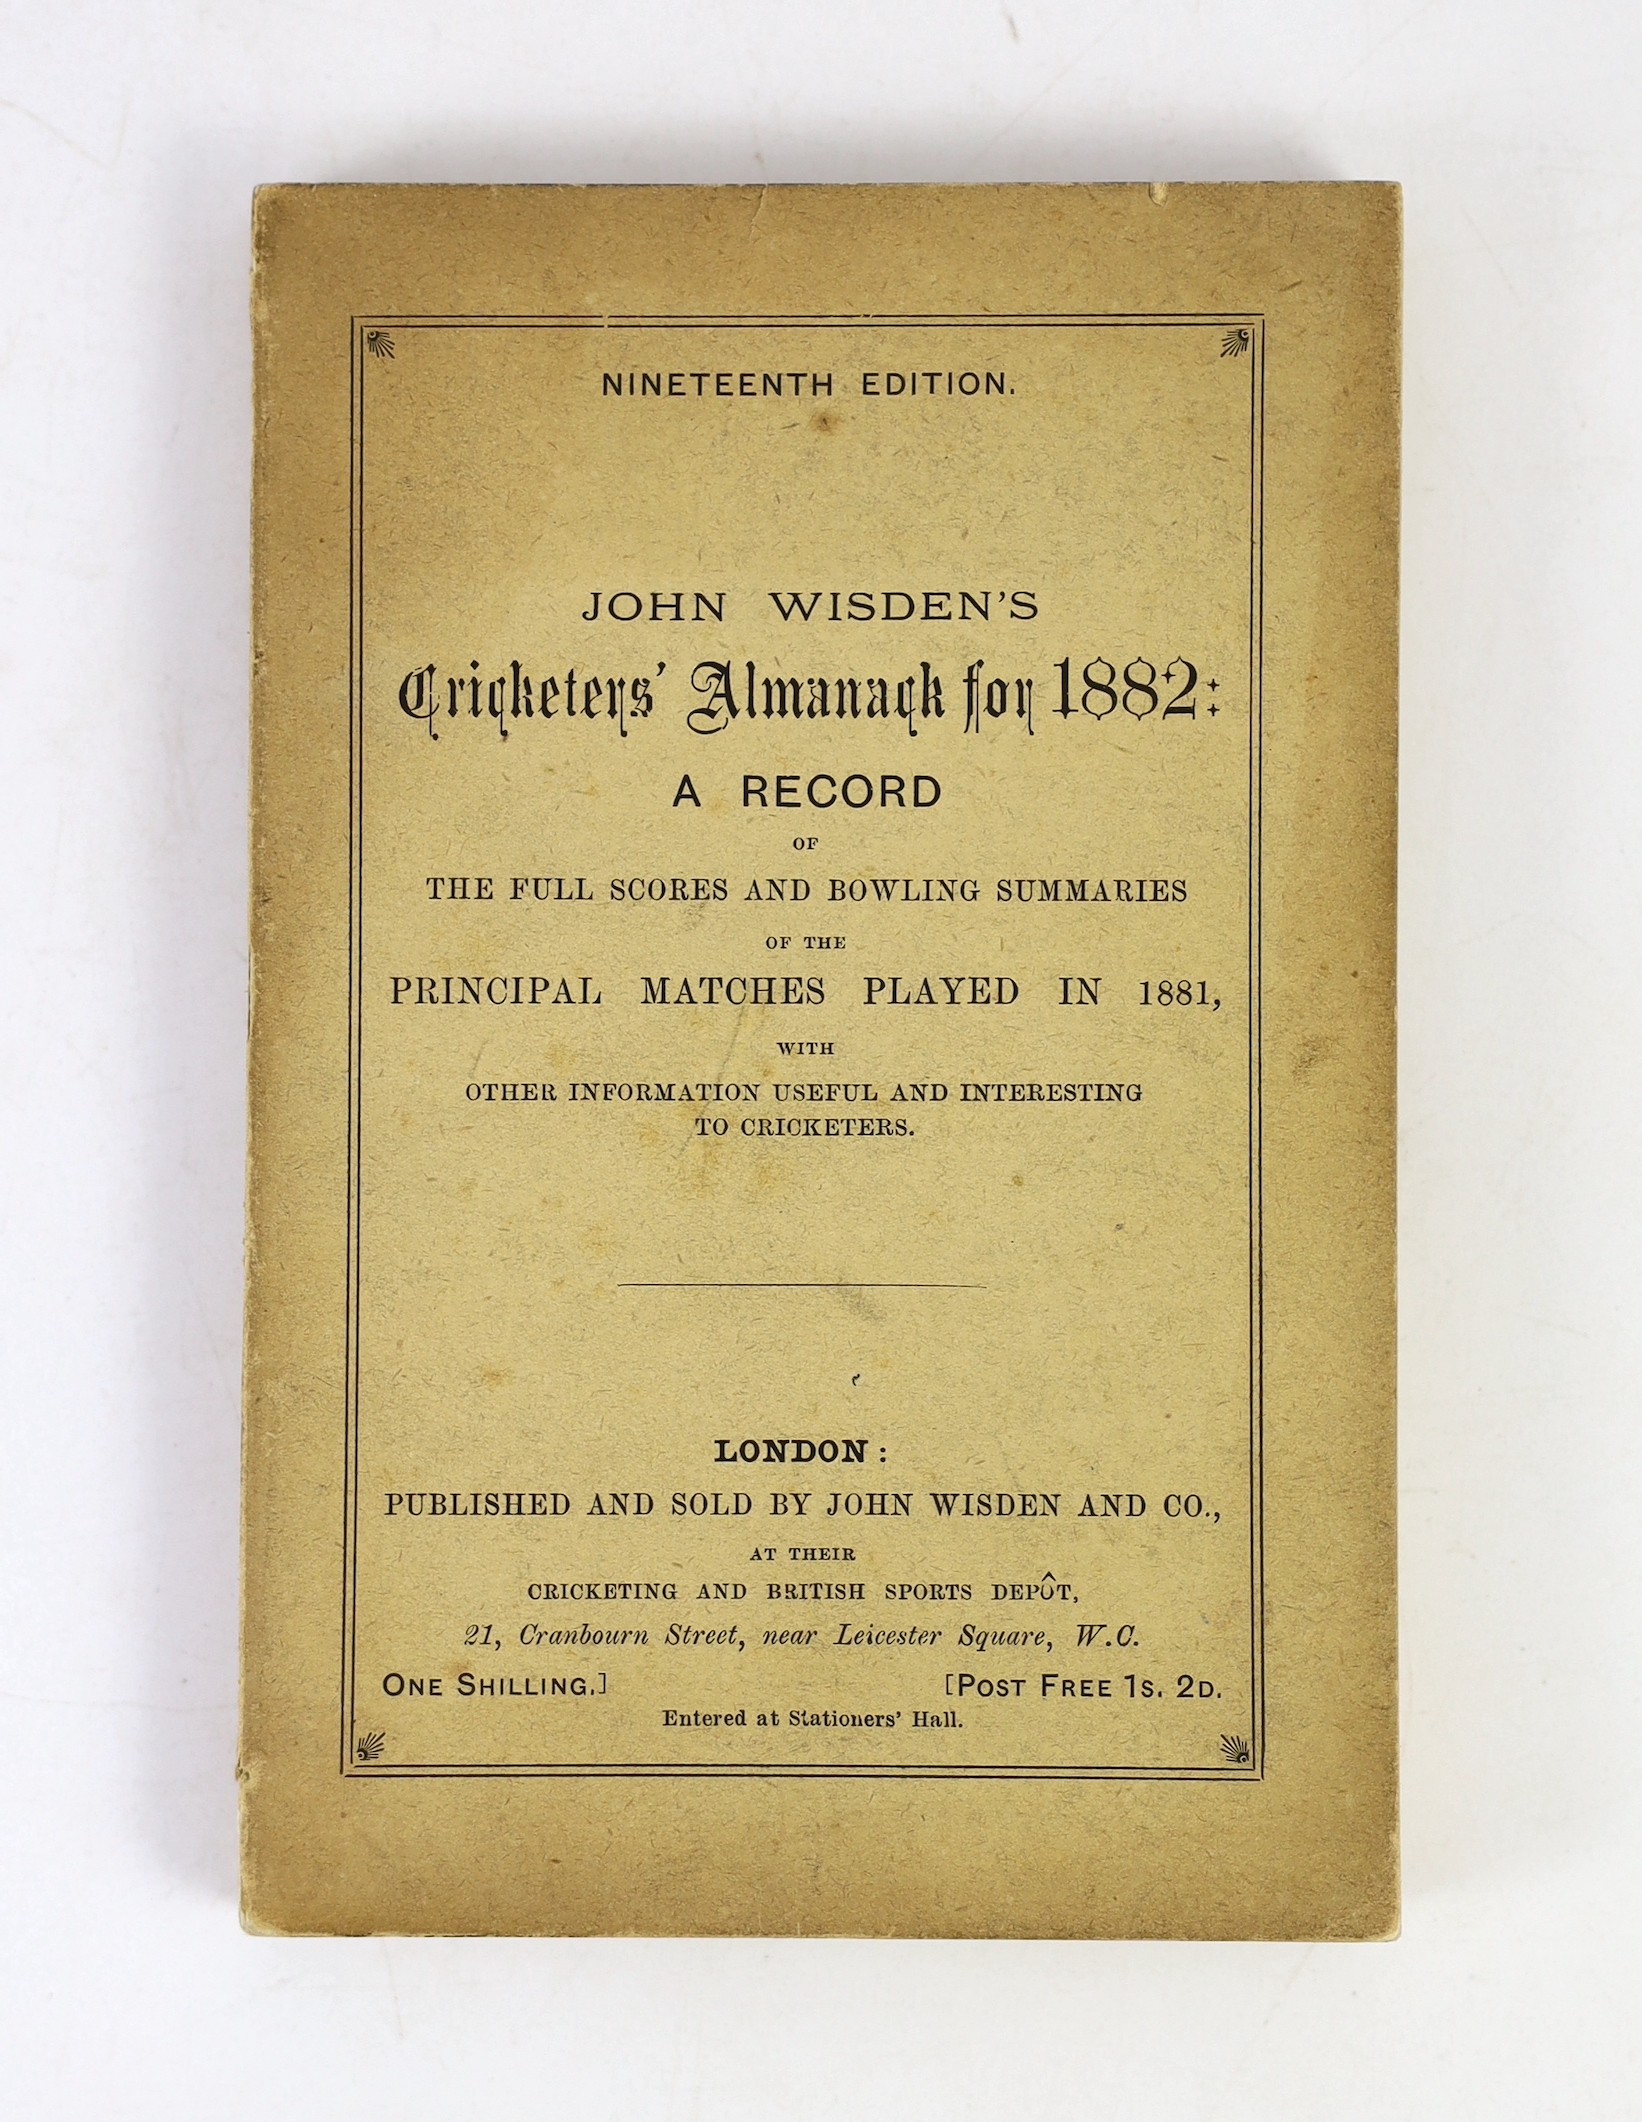 Wisden, John - Cricketers’ Almanack for 1882, 19th edition, original paper wrappers, minor loss to spine head and foot, slight spotting to endpapers.